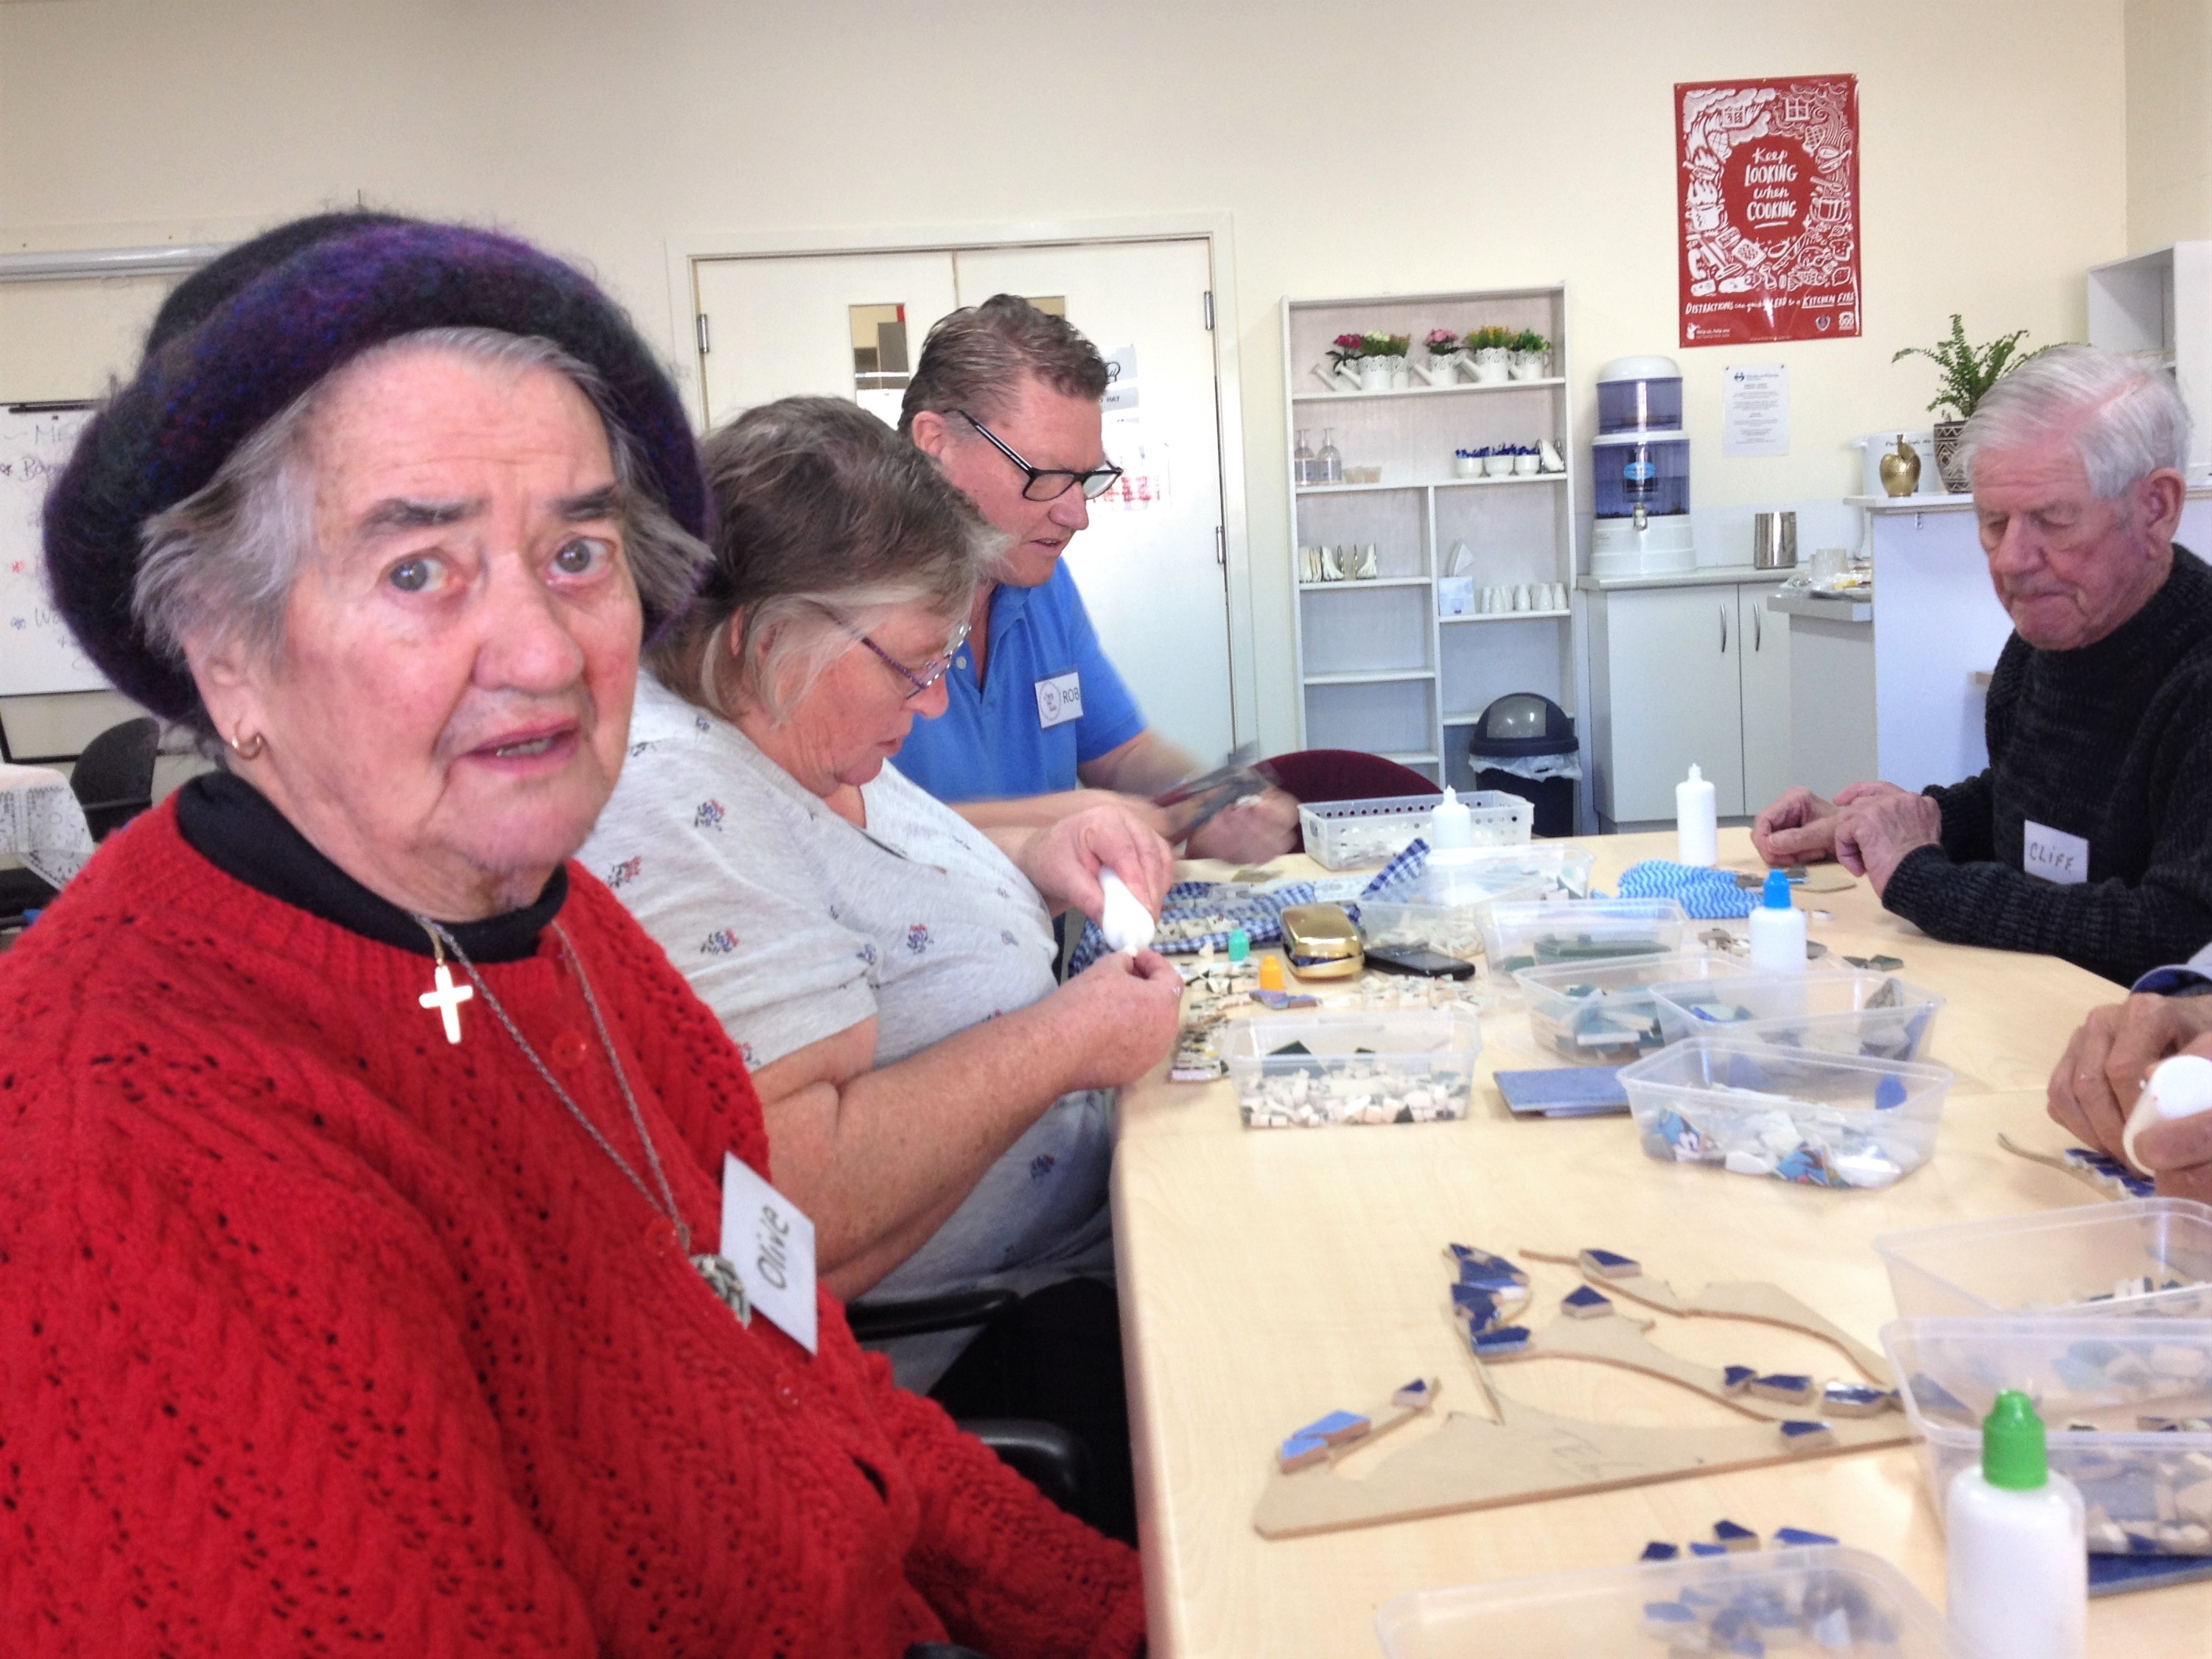 Gypsy Soul Studio provides mosaic fun for Bega Valley Meals On Wheels